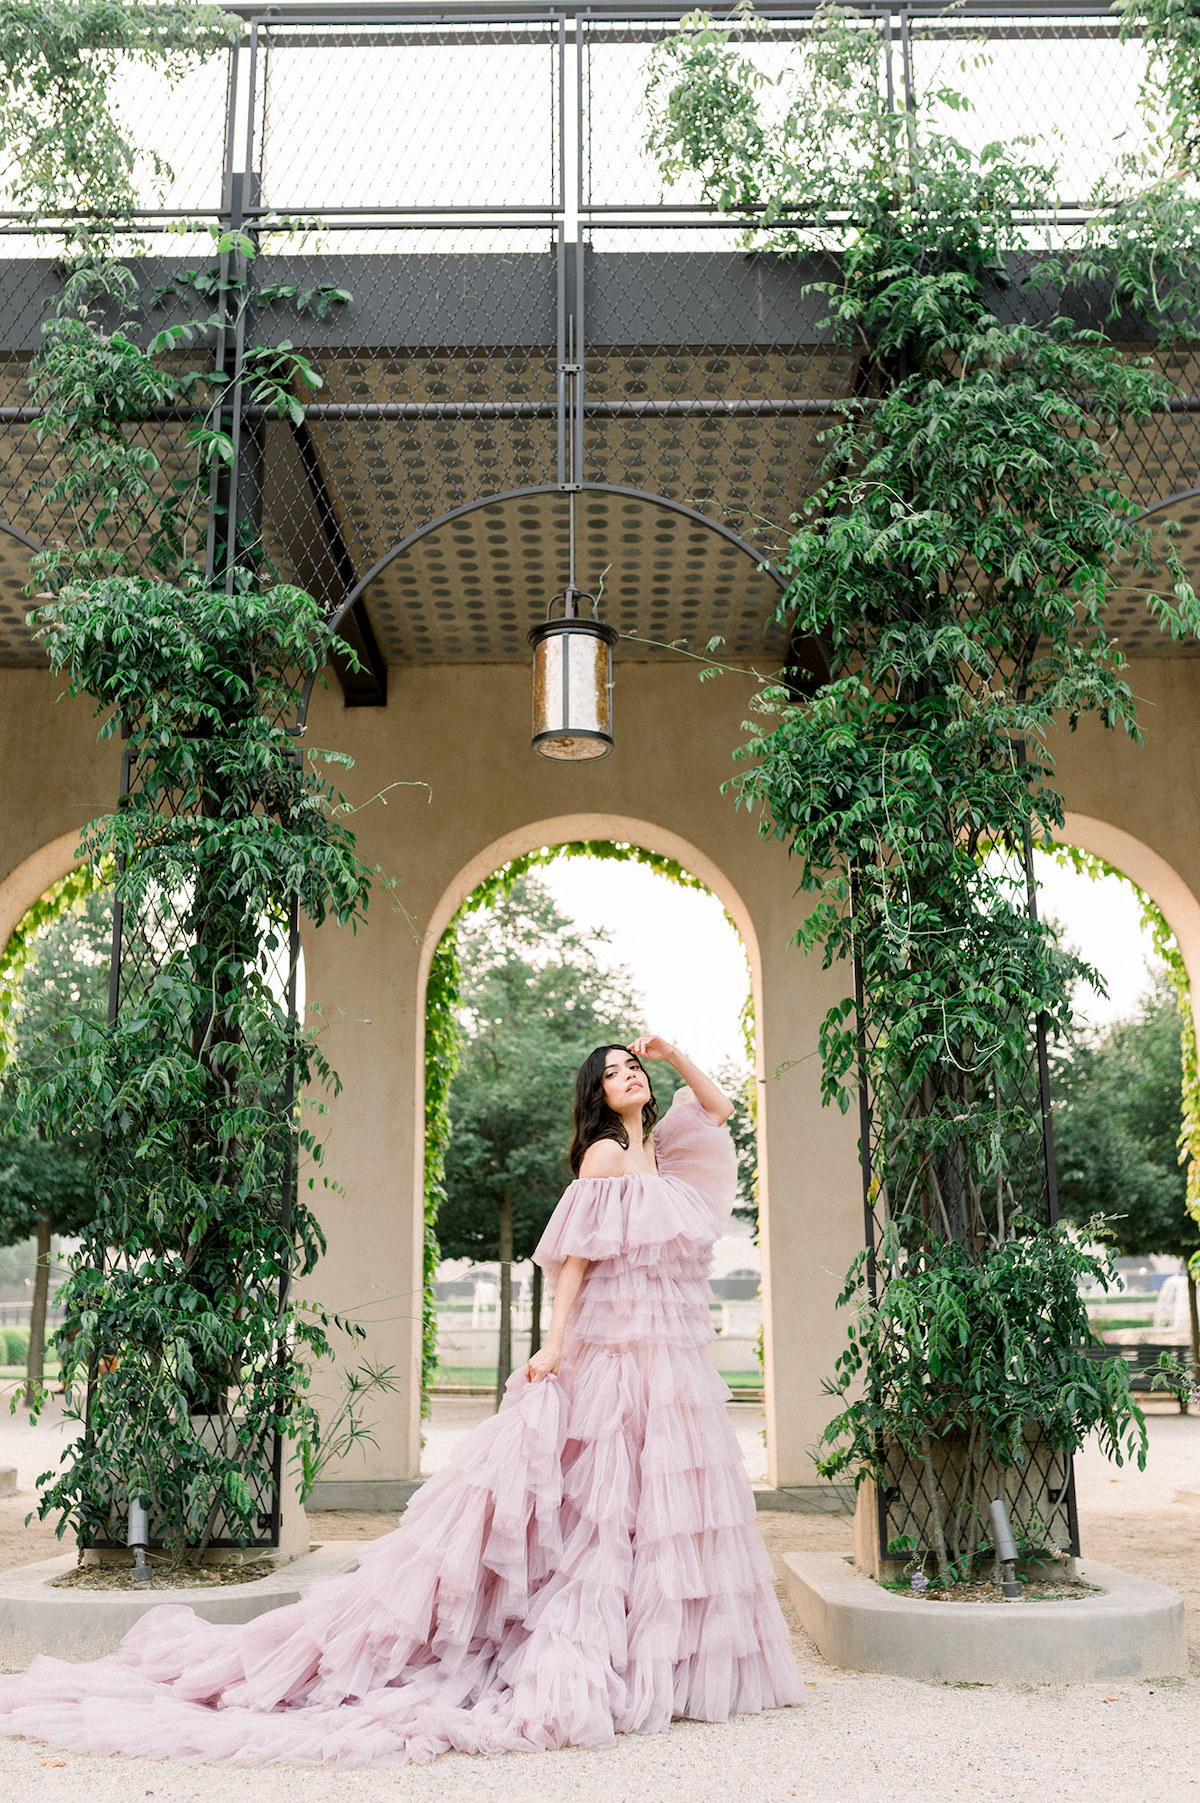 The couture gown transforms Karla into a vision of high-fashion chic, her commanding pose against the natural beauty of Longwood Gardens creating a captivating contrast